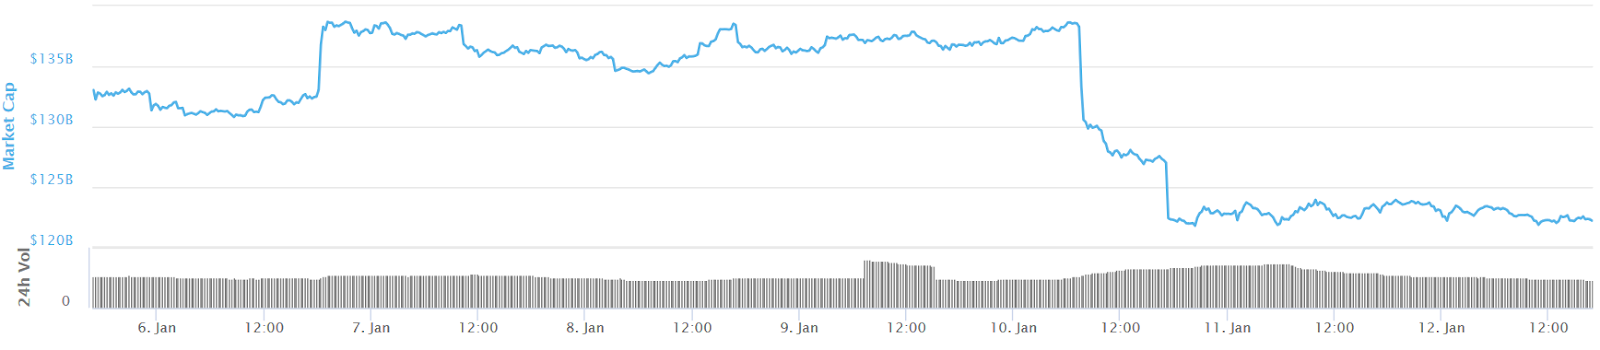 Total crypto market cap 7-day chart